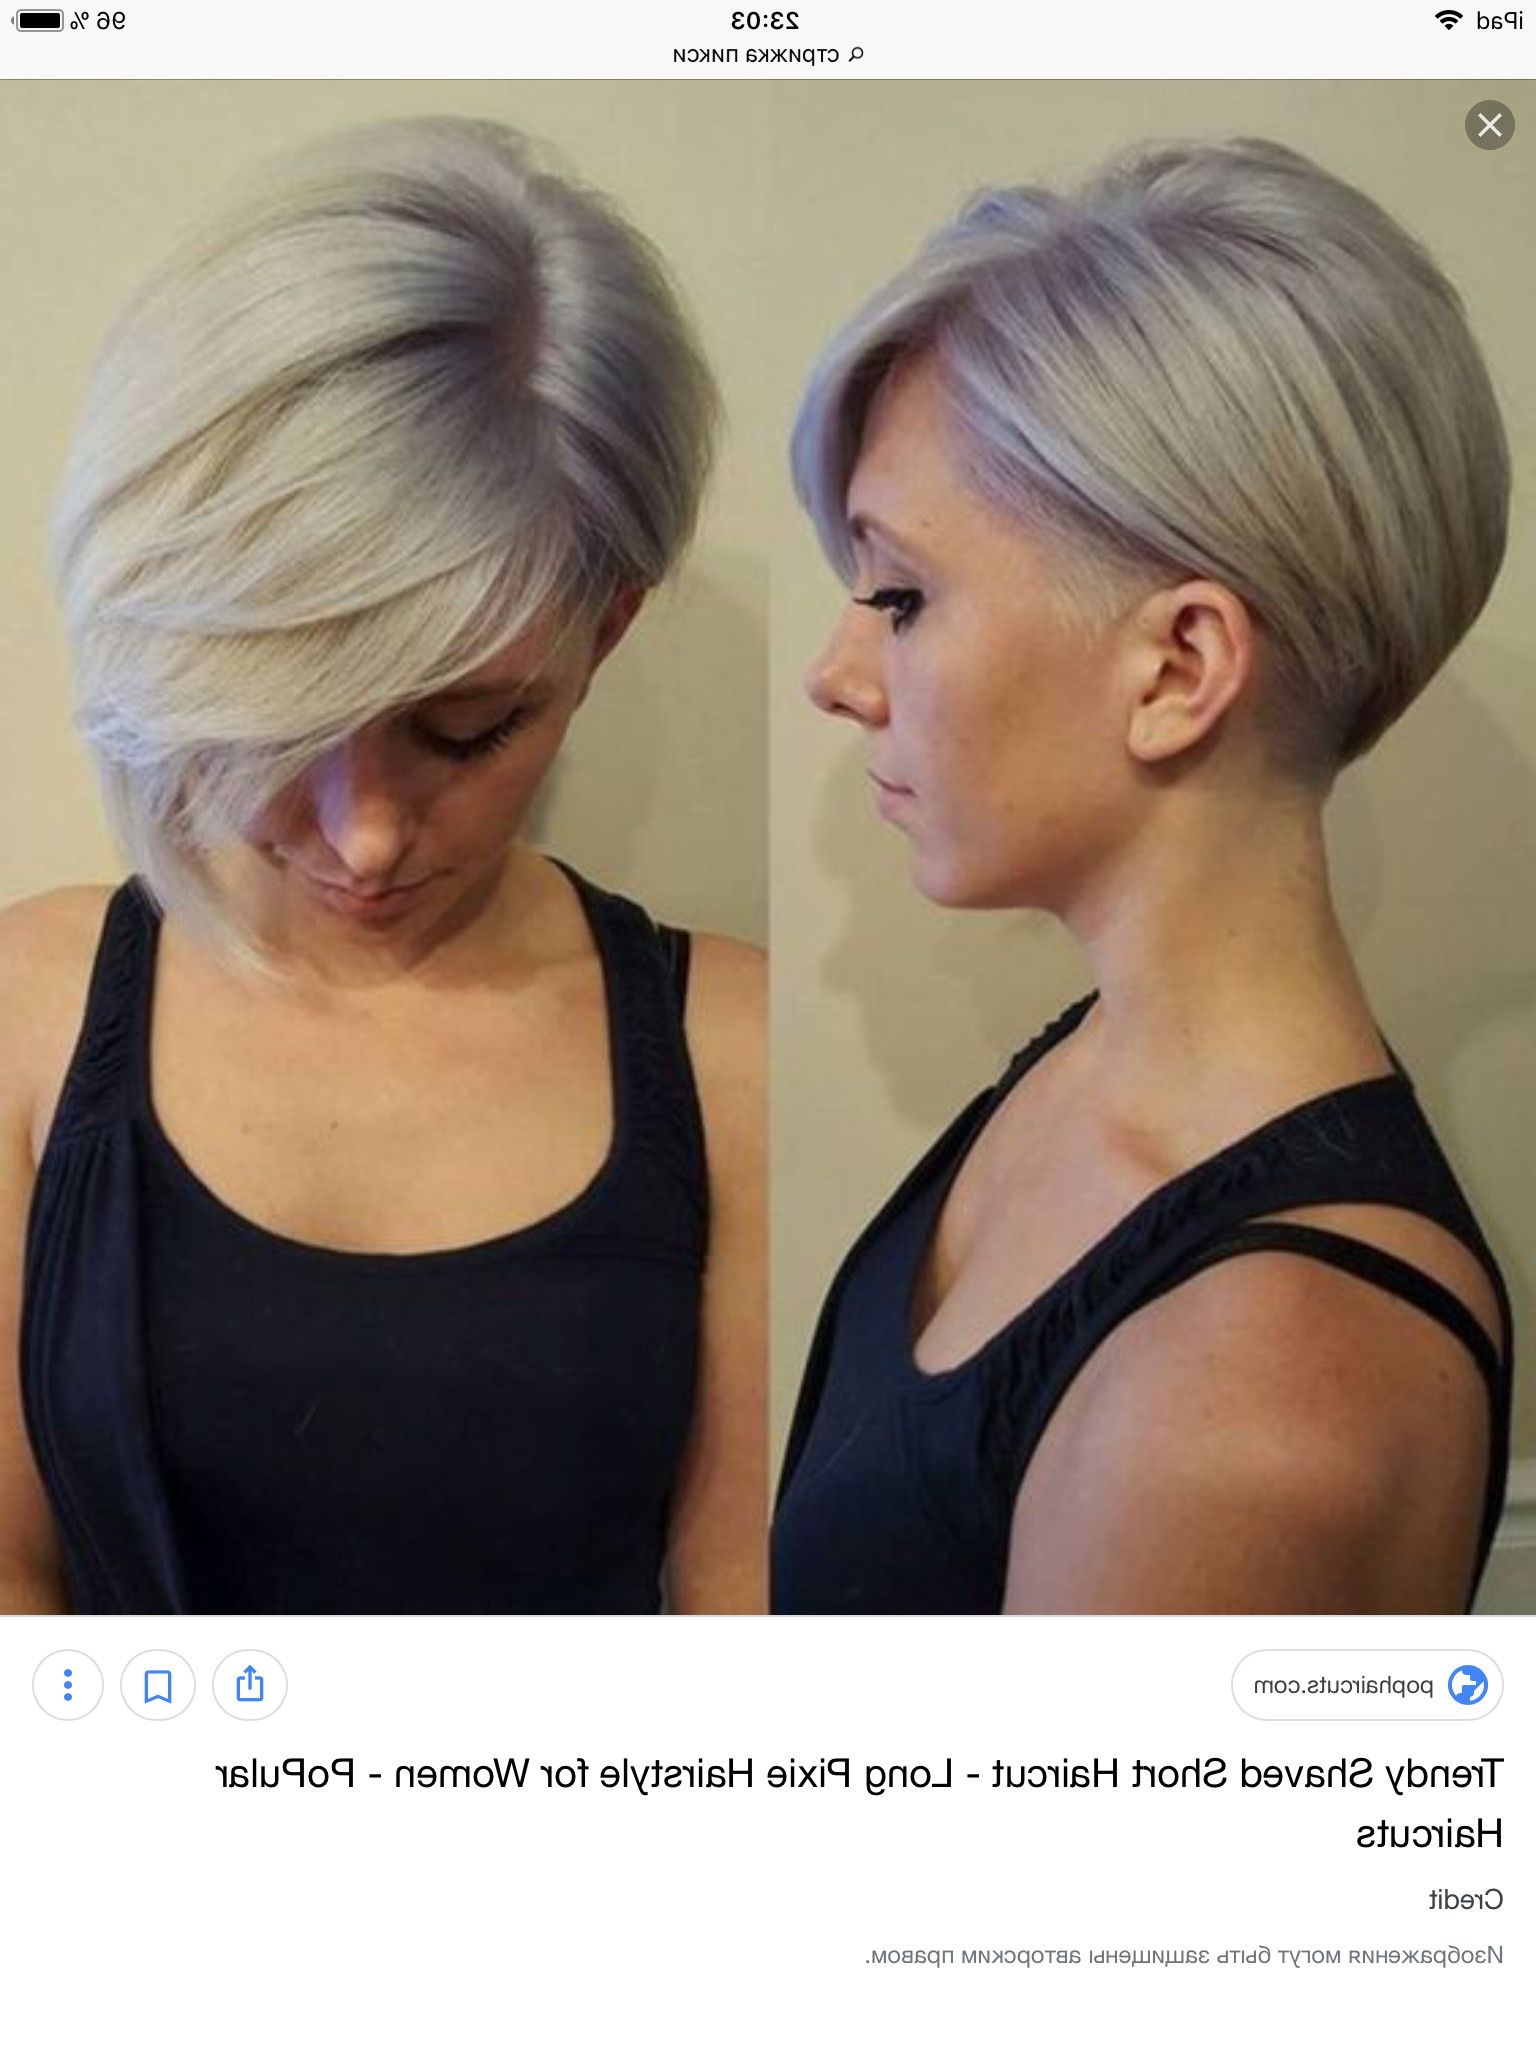 Short Hairstyle For Older Ladies Fresh Short Hair Cuts Women For Asymmetrical Shaggy Pixie Hairstyles (View 20 of 20)